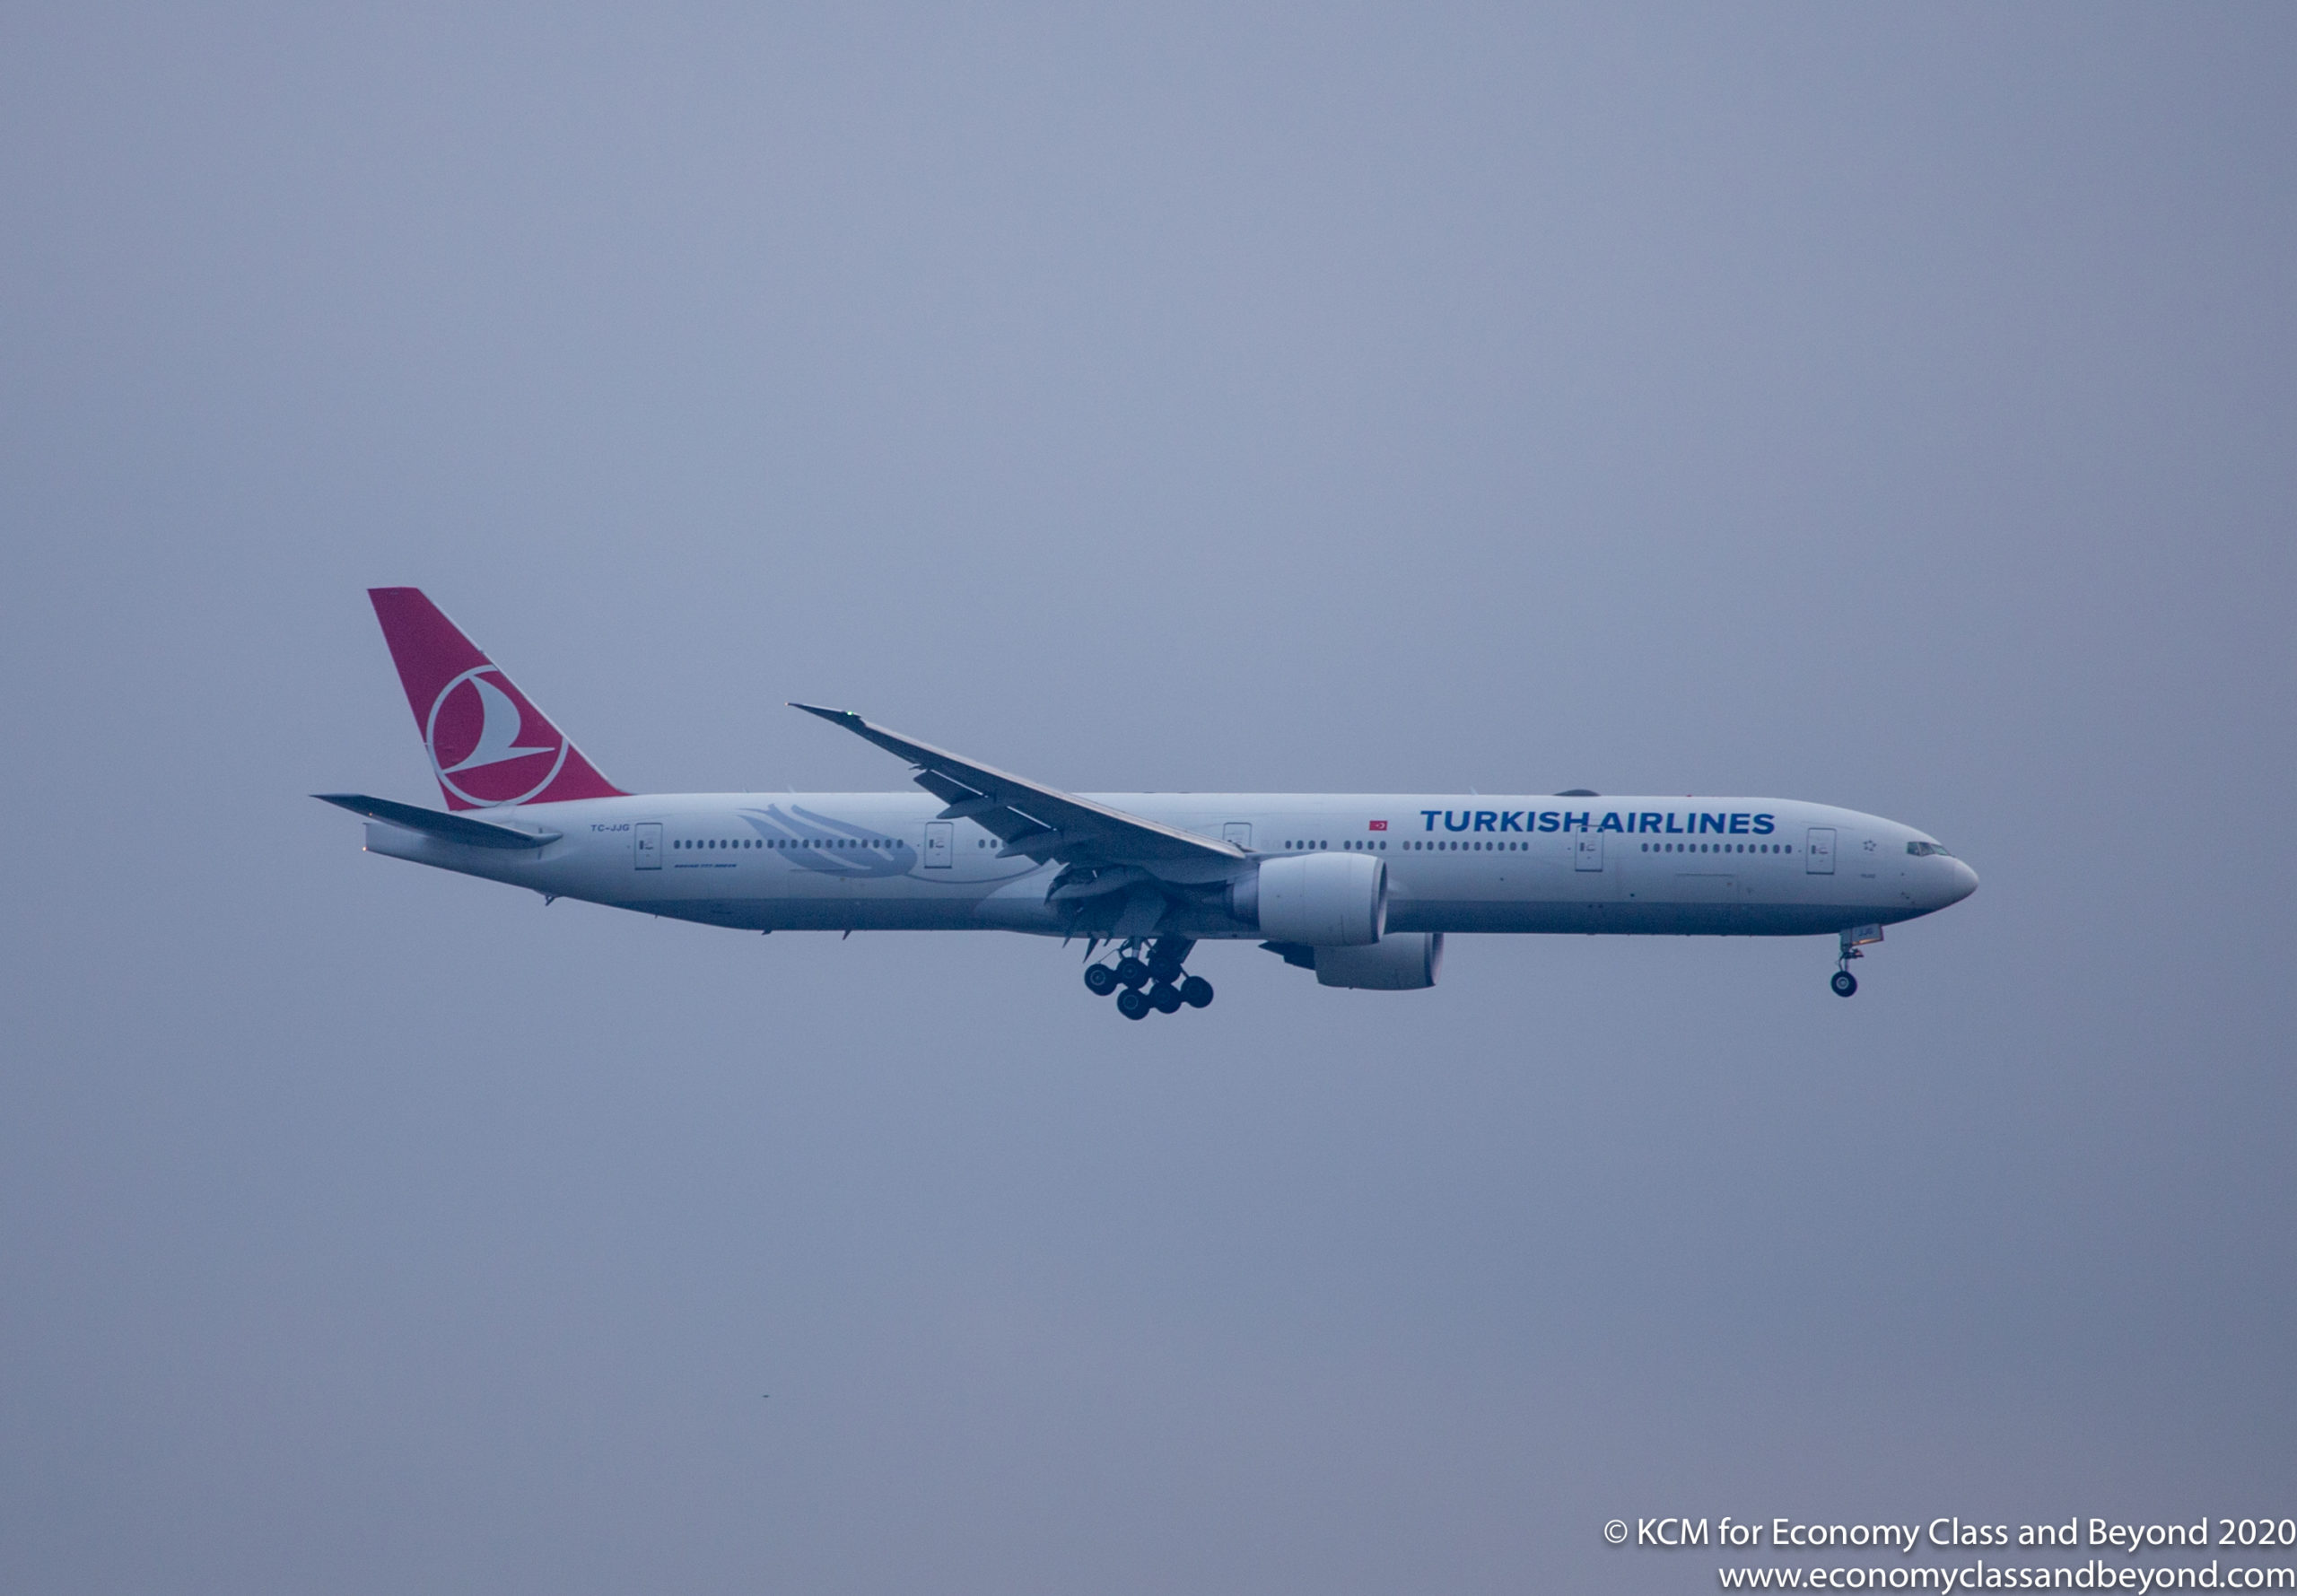 Airplane Art - Turkish Airlines Boeing 777-300ER on final approach